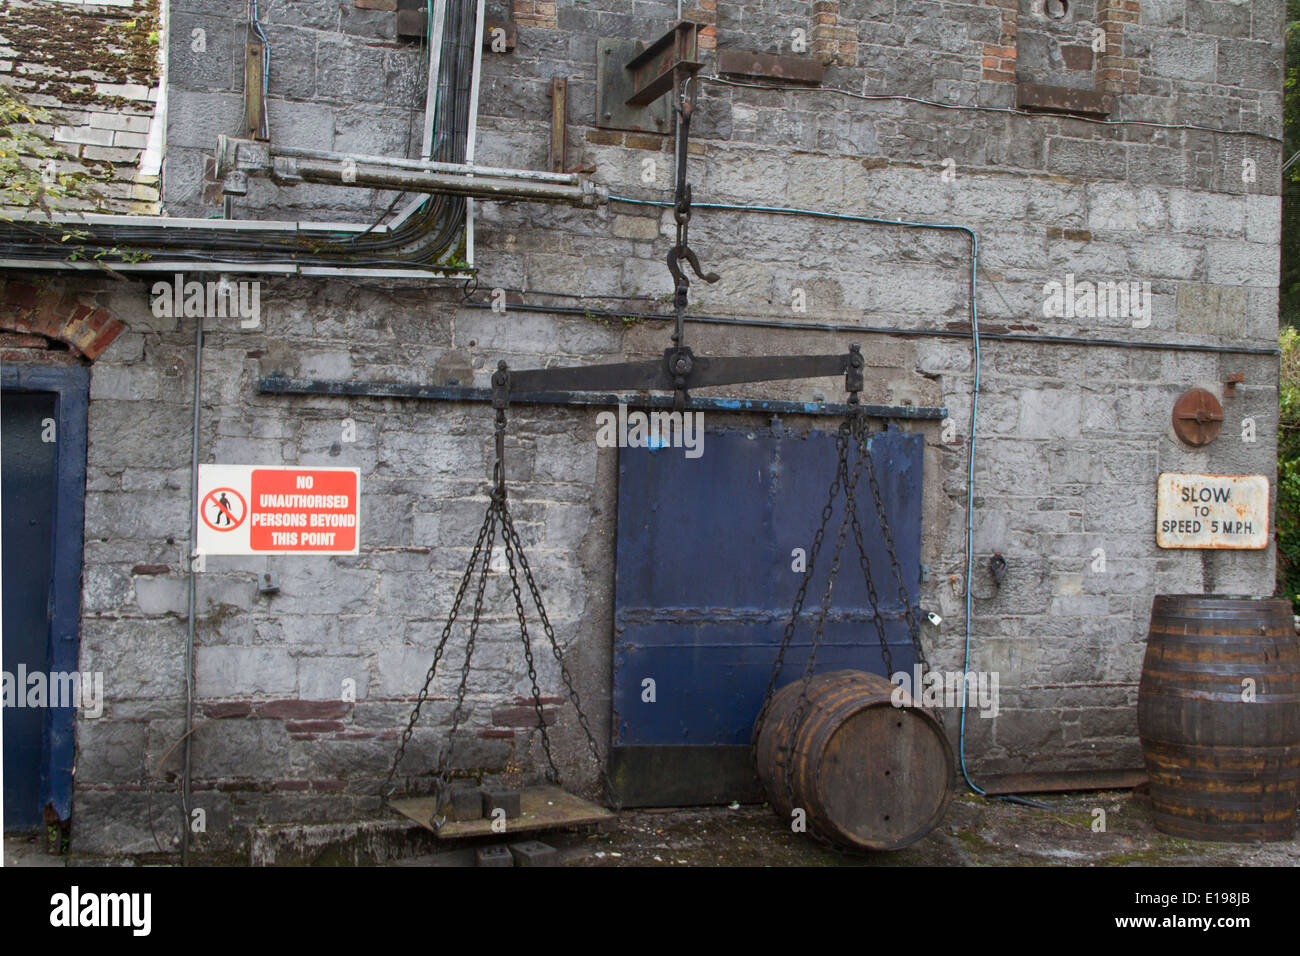 Scale used to weigh wh isky barrels to determine excise tax Jameson Distillery,Ireland Stock Photo